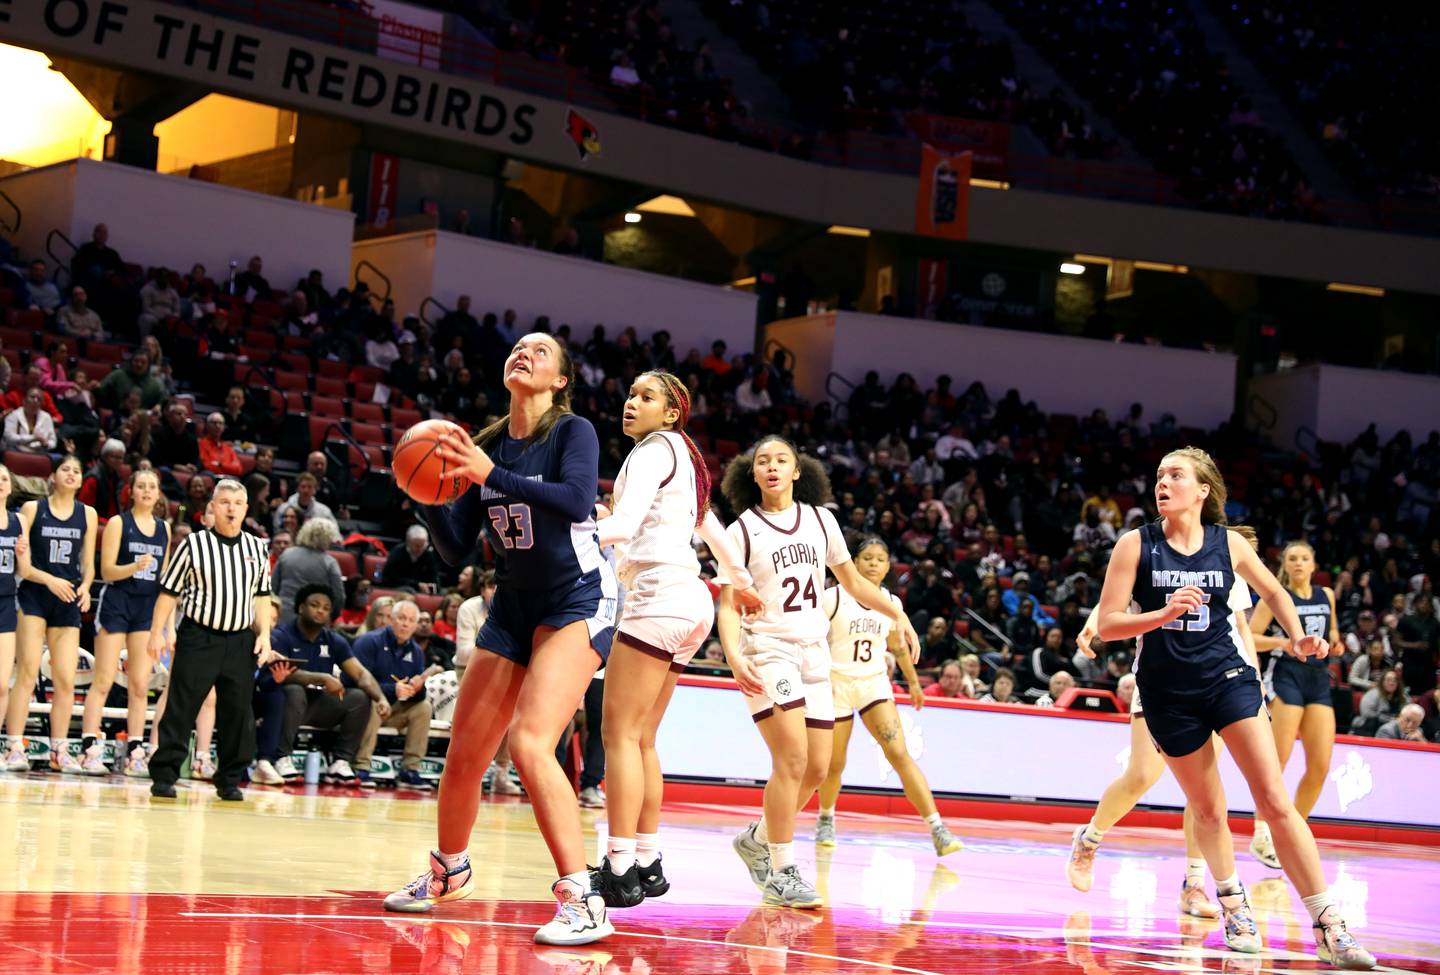 Nazareth Academy's Danielle Scully (23) looks for her shot from under the basket during the Class 3A girls basketball state semifinal against Peoria at Redbird Arena in Normal on Friday, March 3, 2023.